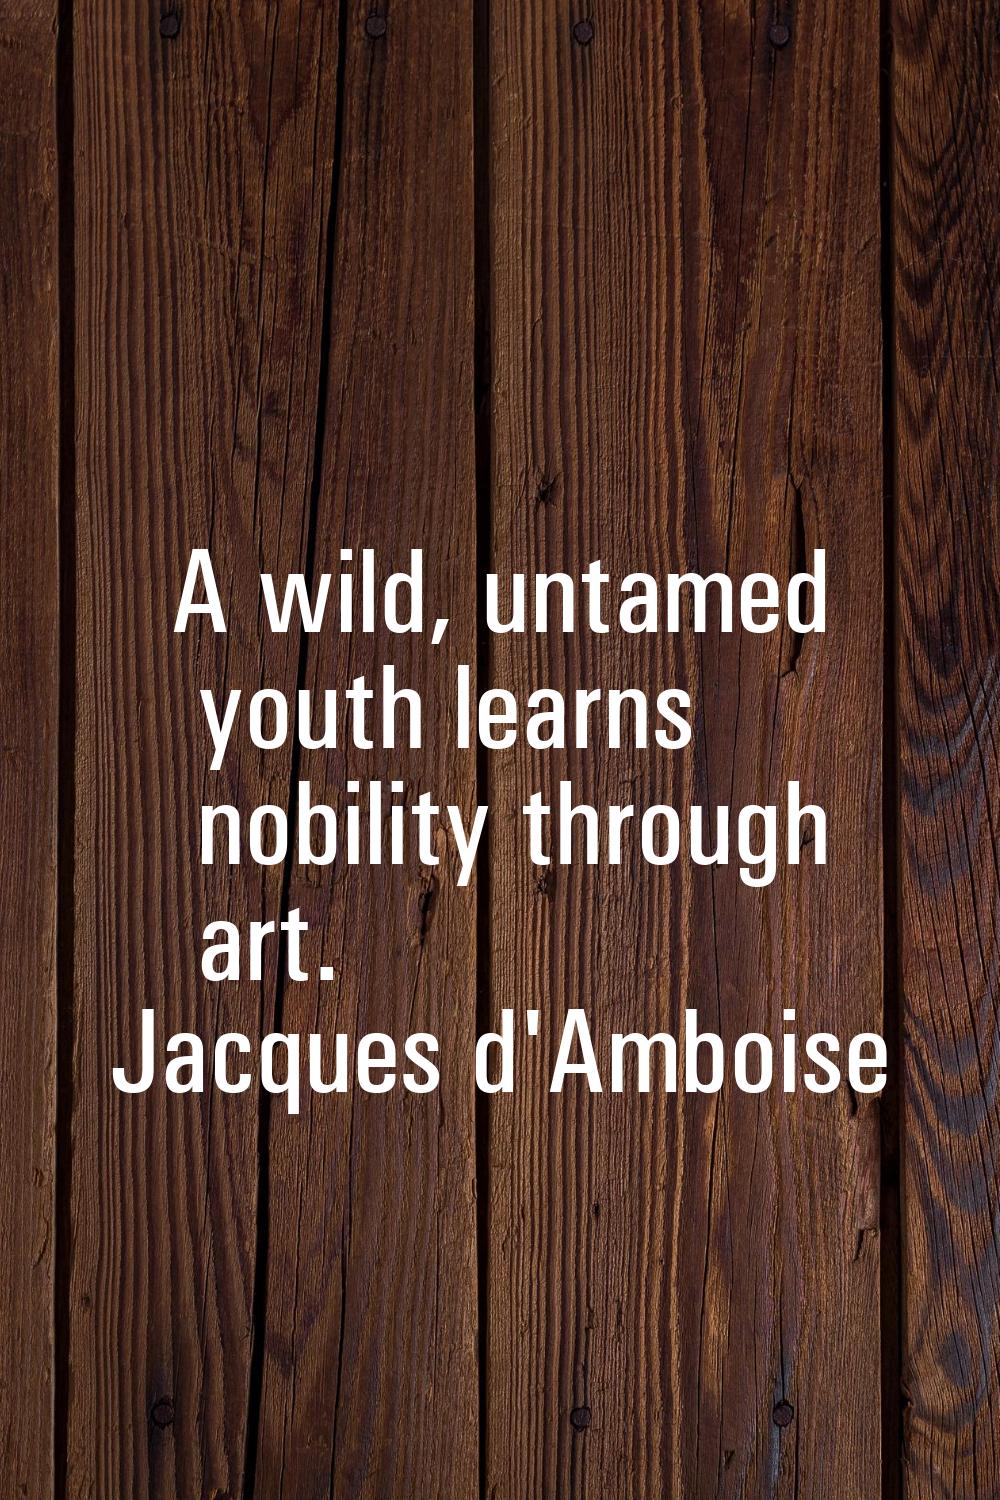 A wild, untamed youth learns nobility through art.